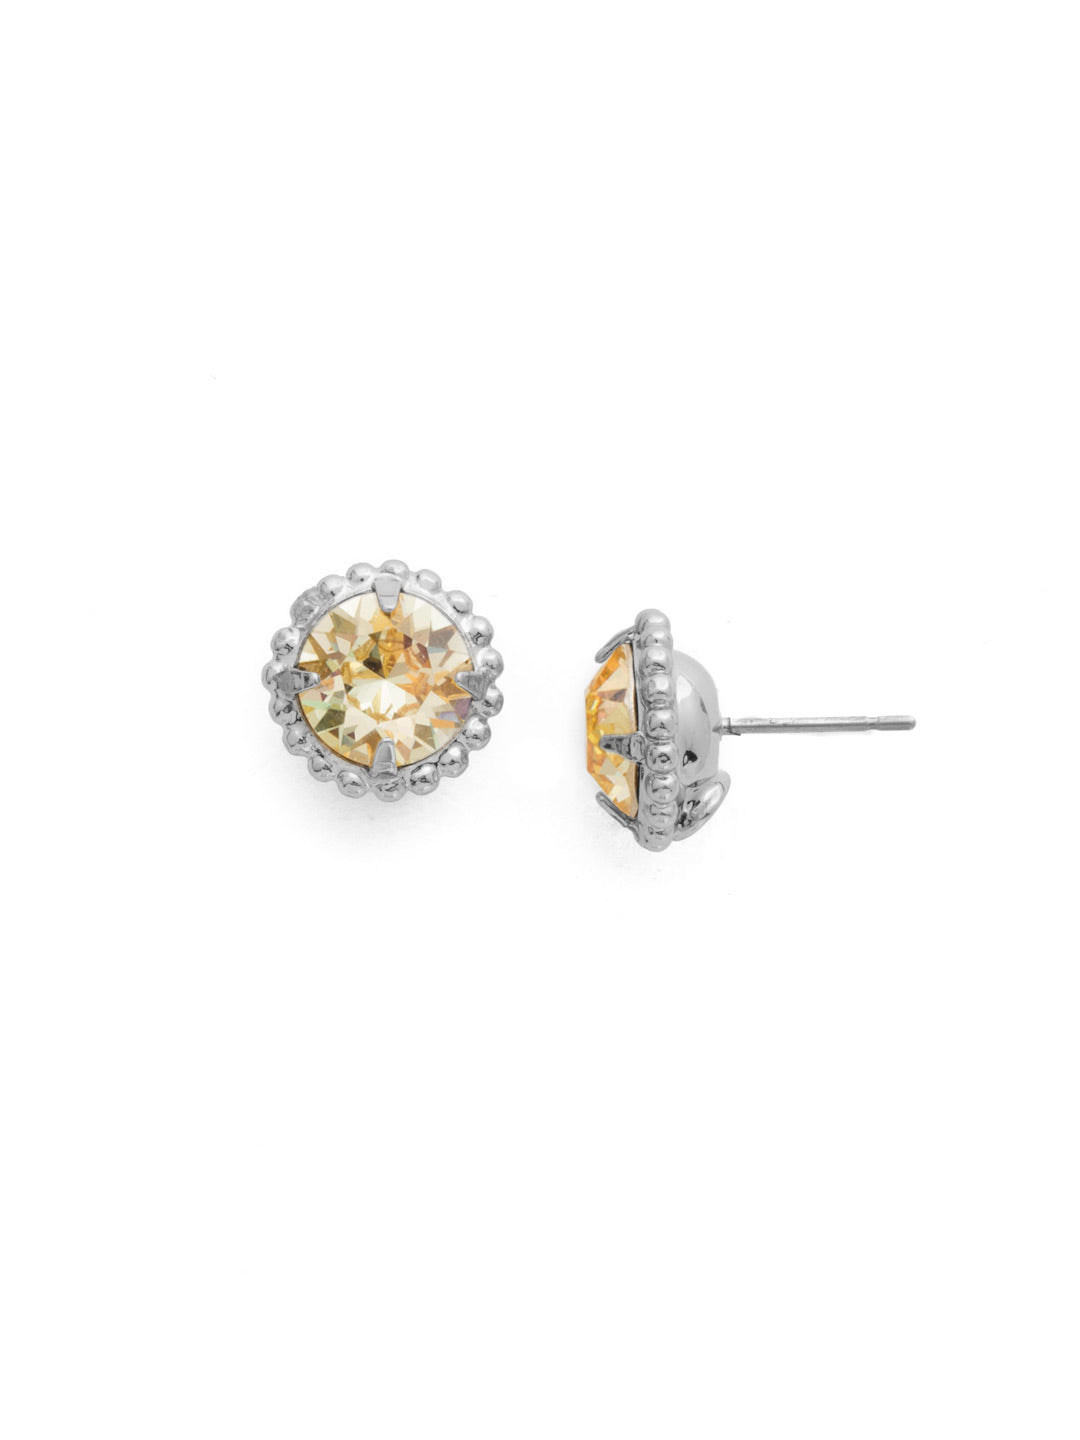 Simplicity Stud Earrings - EBY38PDCCH - <p>A timeless classic, the Simplicity Stud Earrings feature round cut crystals in a variety of colors; accented with a halo of metal beaded detail. Need help picking a stud? <a href="https://www.sorrelli.com/blogs/sisterhood/round-stud-earrings-101-a-rundown-of-sizes-styles-and-sparkle">Check out our size guide!</a> From Sorrelli's Crystal Champagne collection in our Palladium finish.</p>